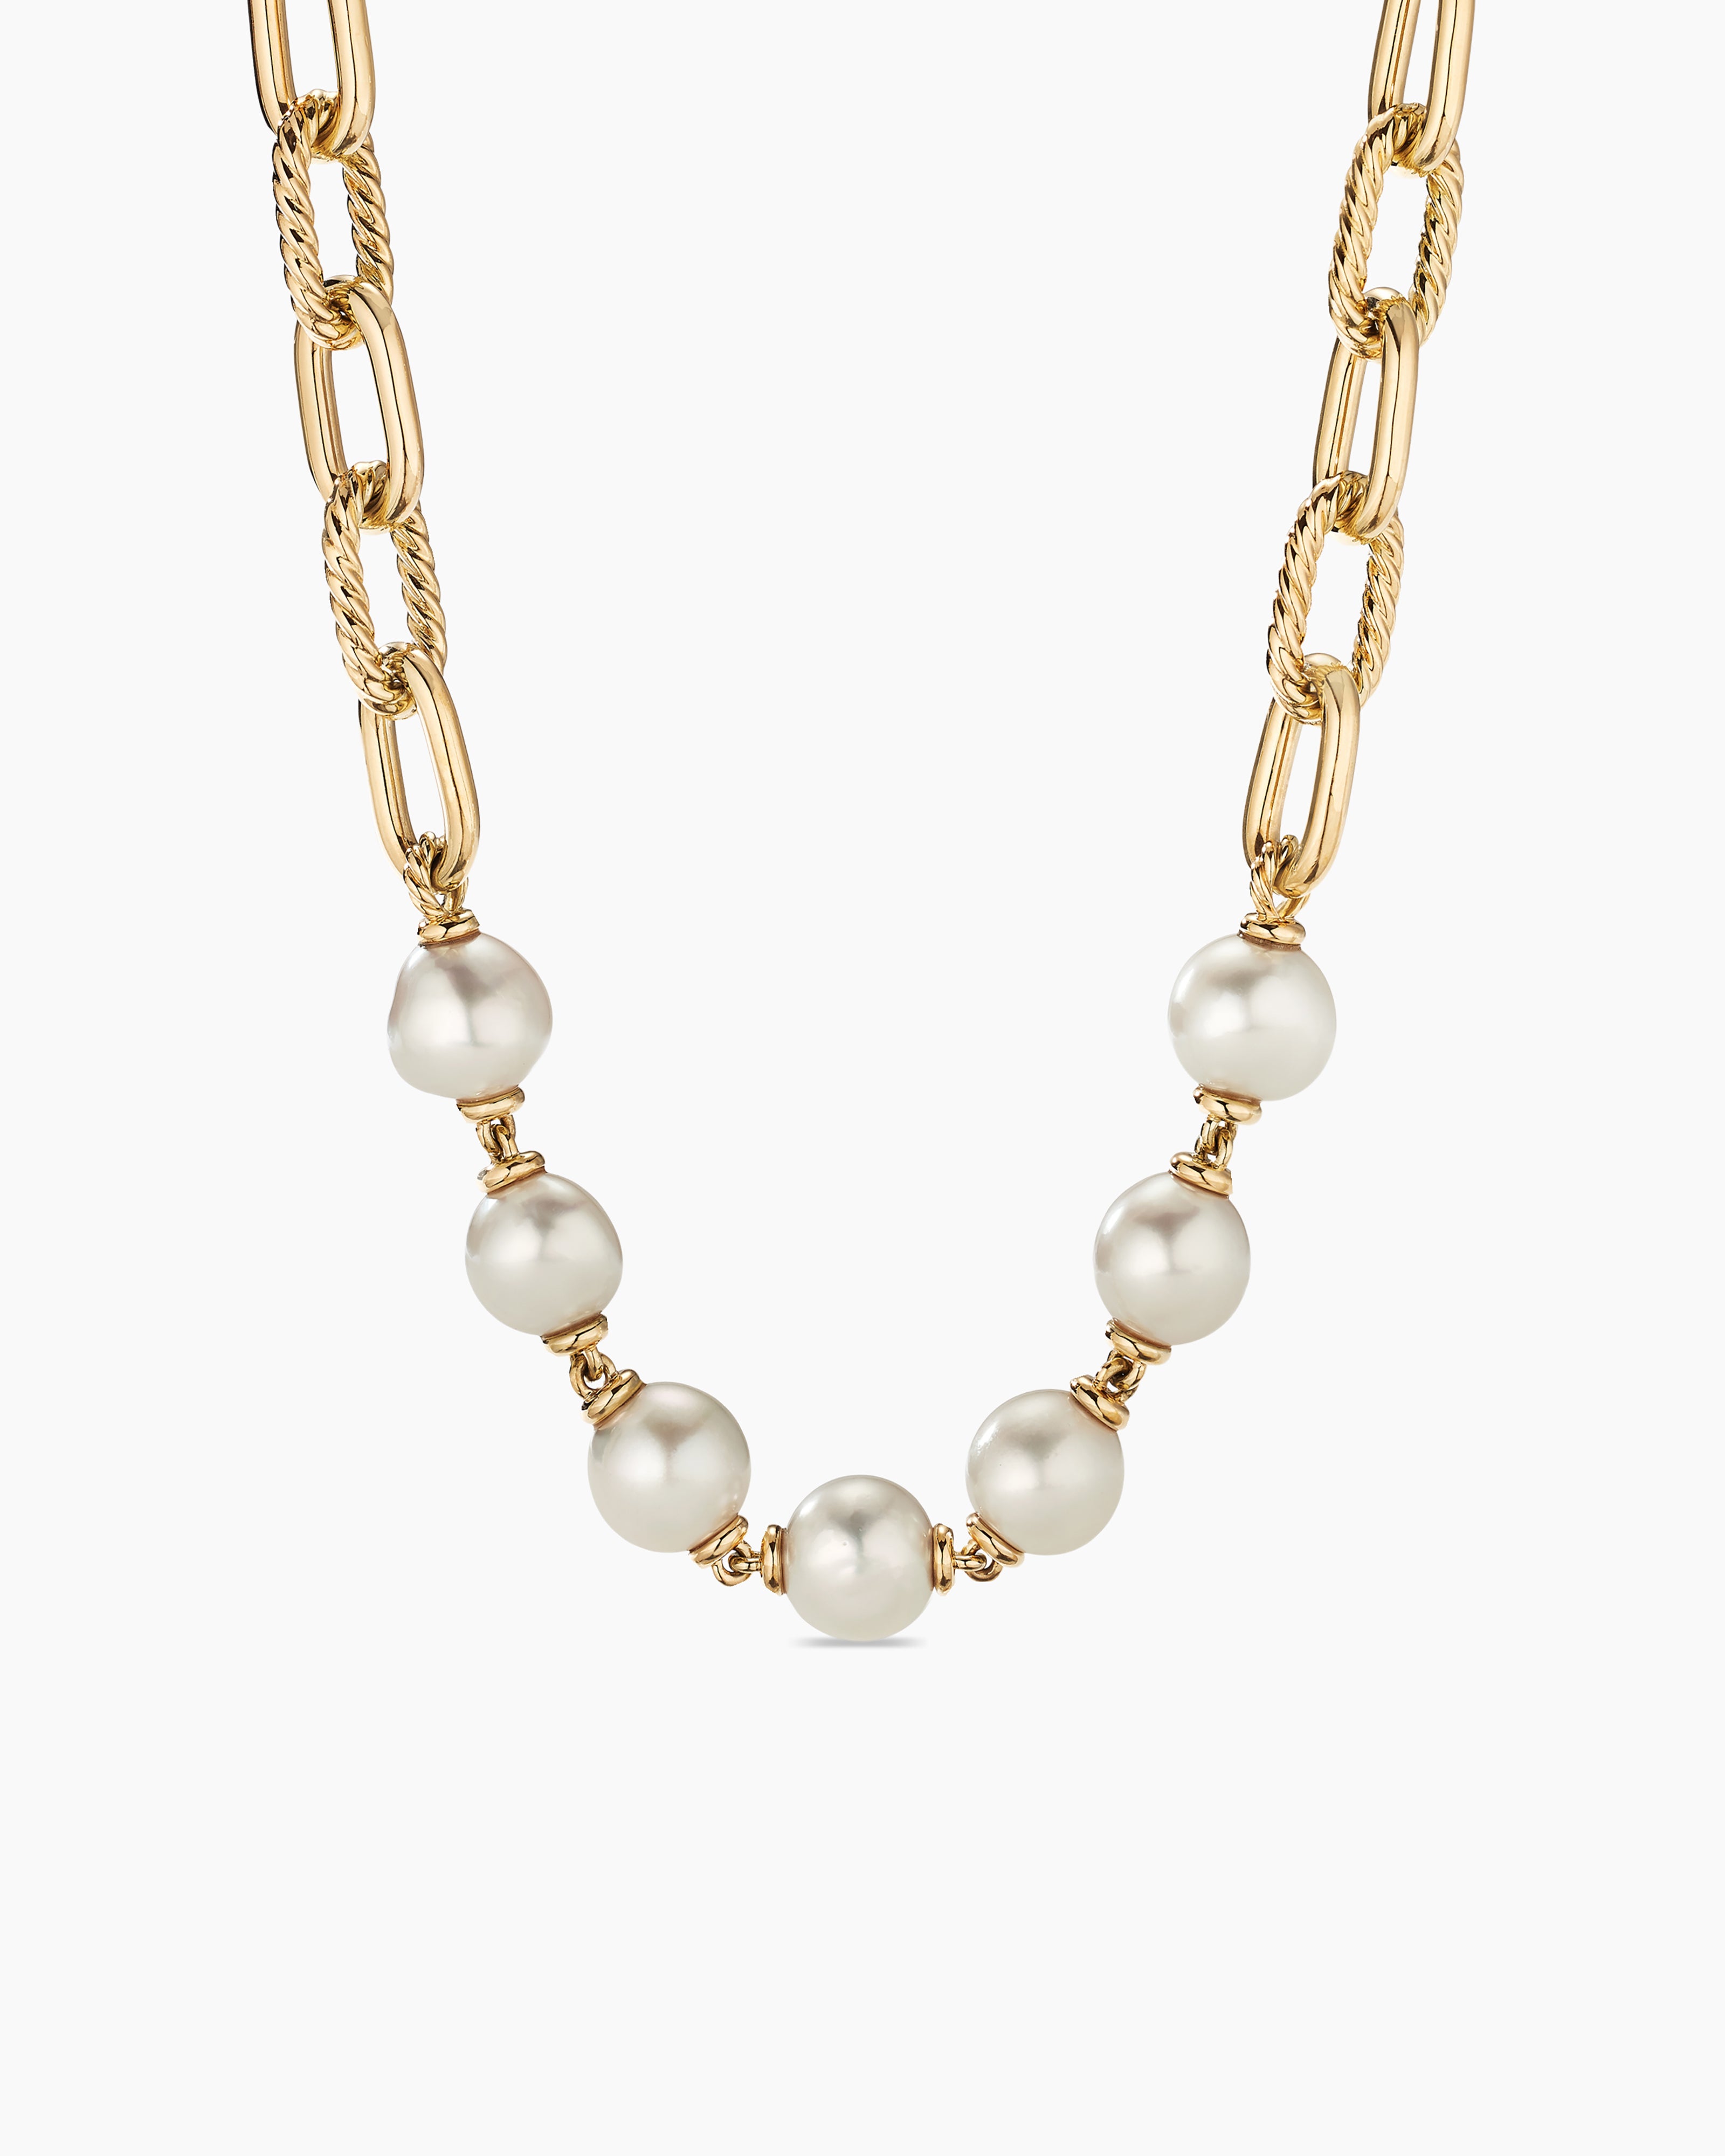 Plaited Rope Chain and Pearl Necklace in Gold | Lisa Angel